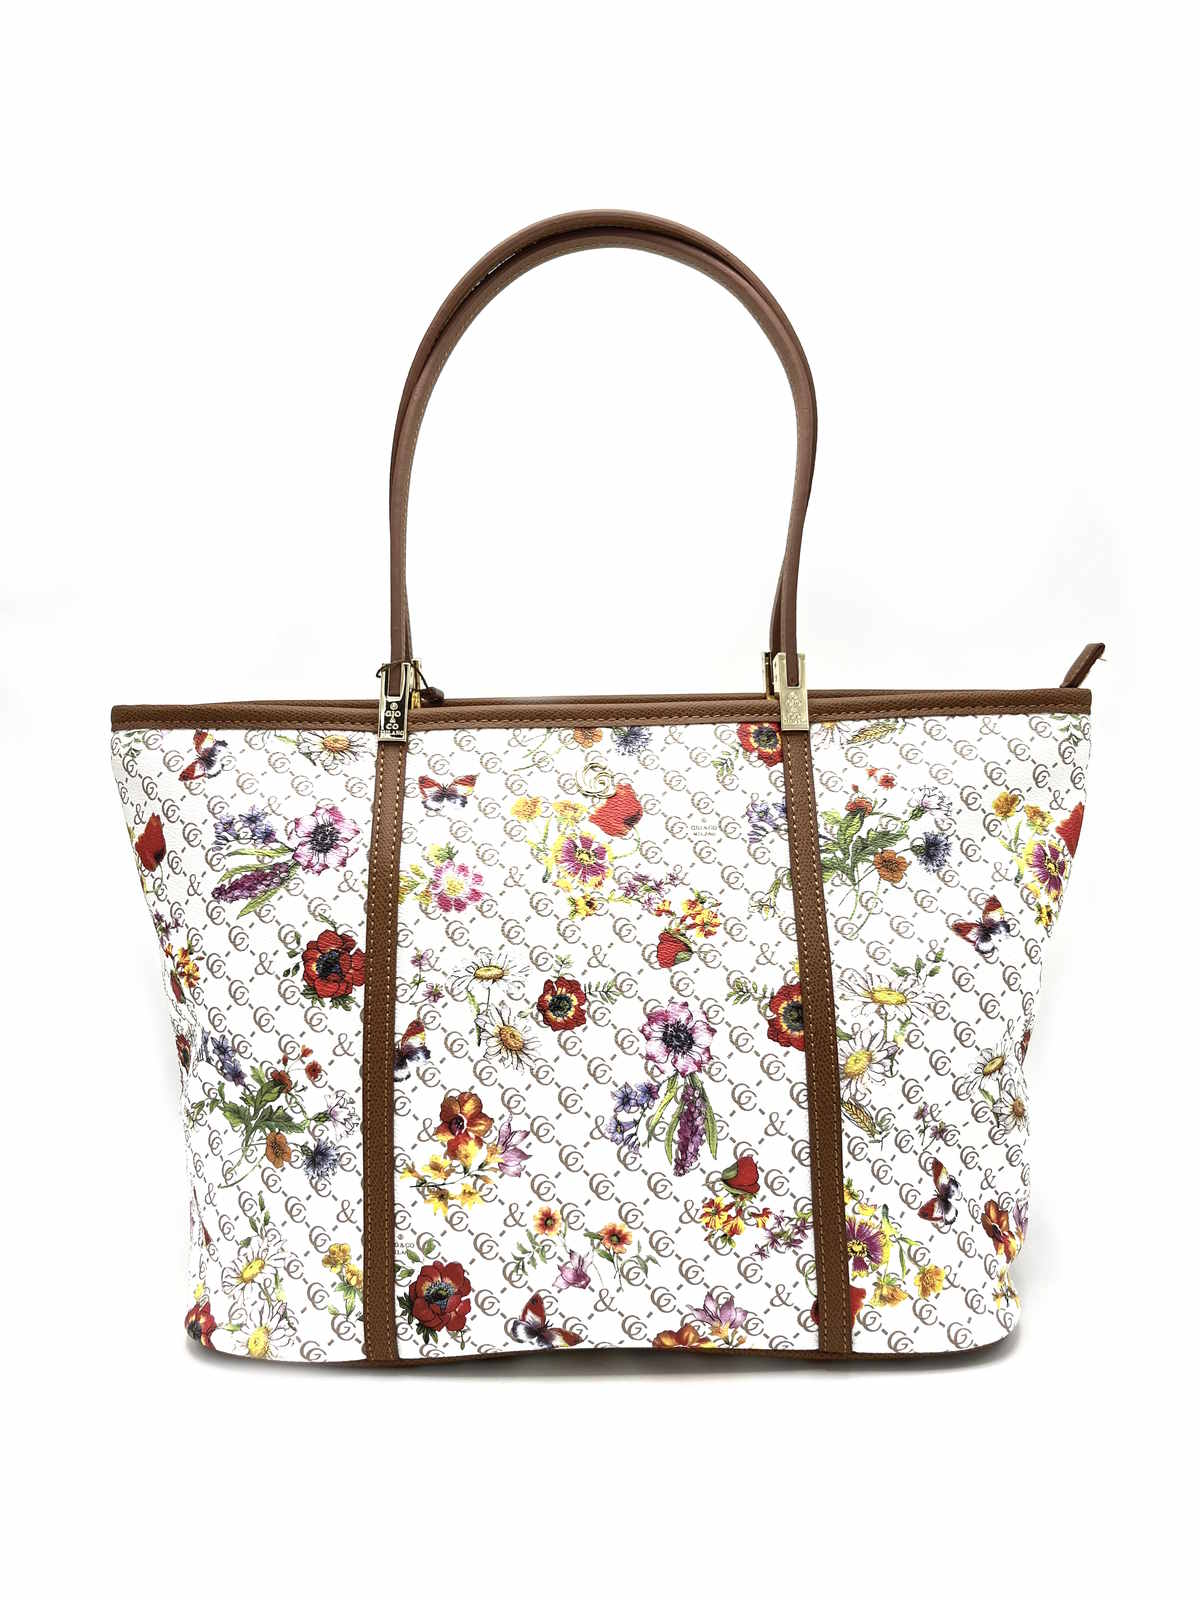 Brand GIO&amp;CO, shopping bag Tote in ecopelle, art.  CG21.475